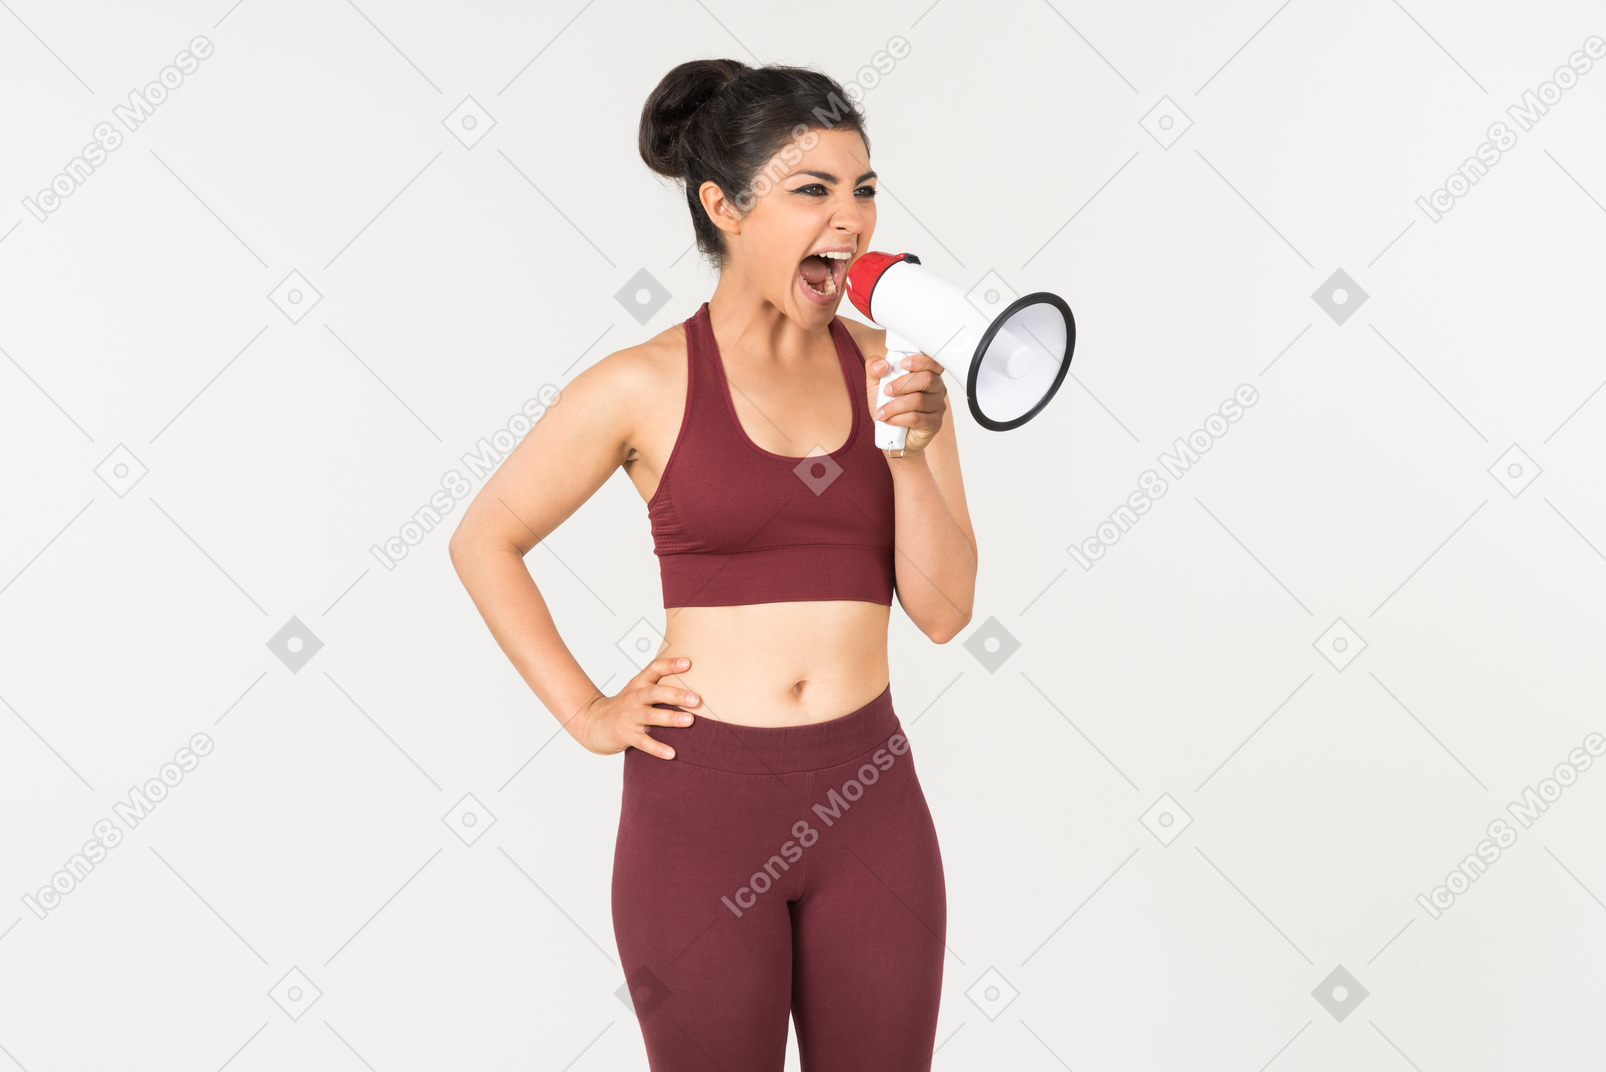 Angry looking young indian woman screaming using megaphone